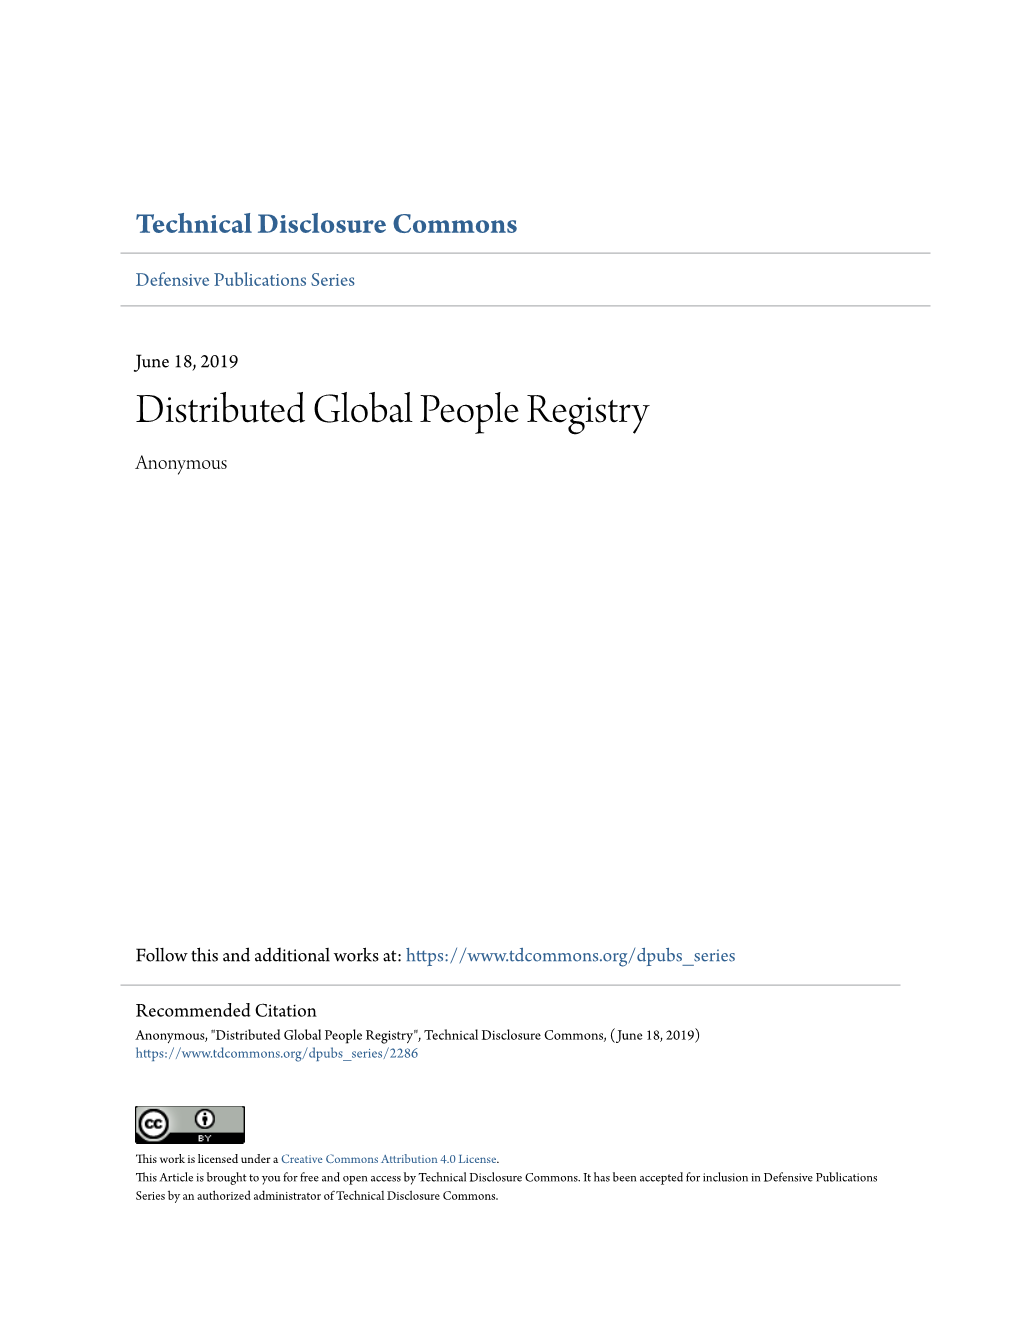 Distributed Global People Registry Anonymous